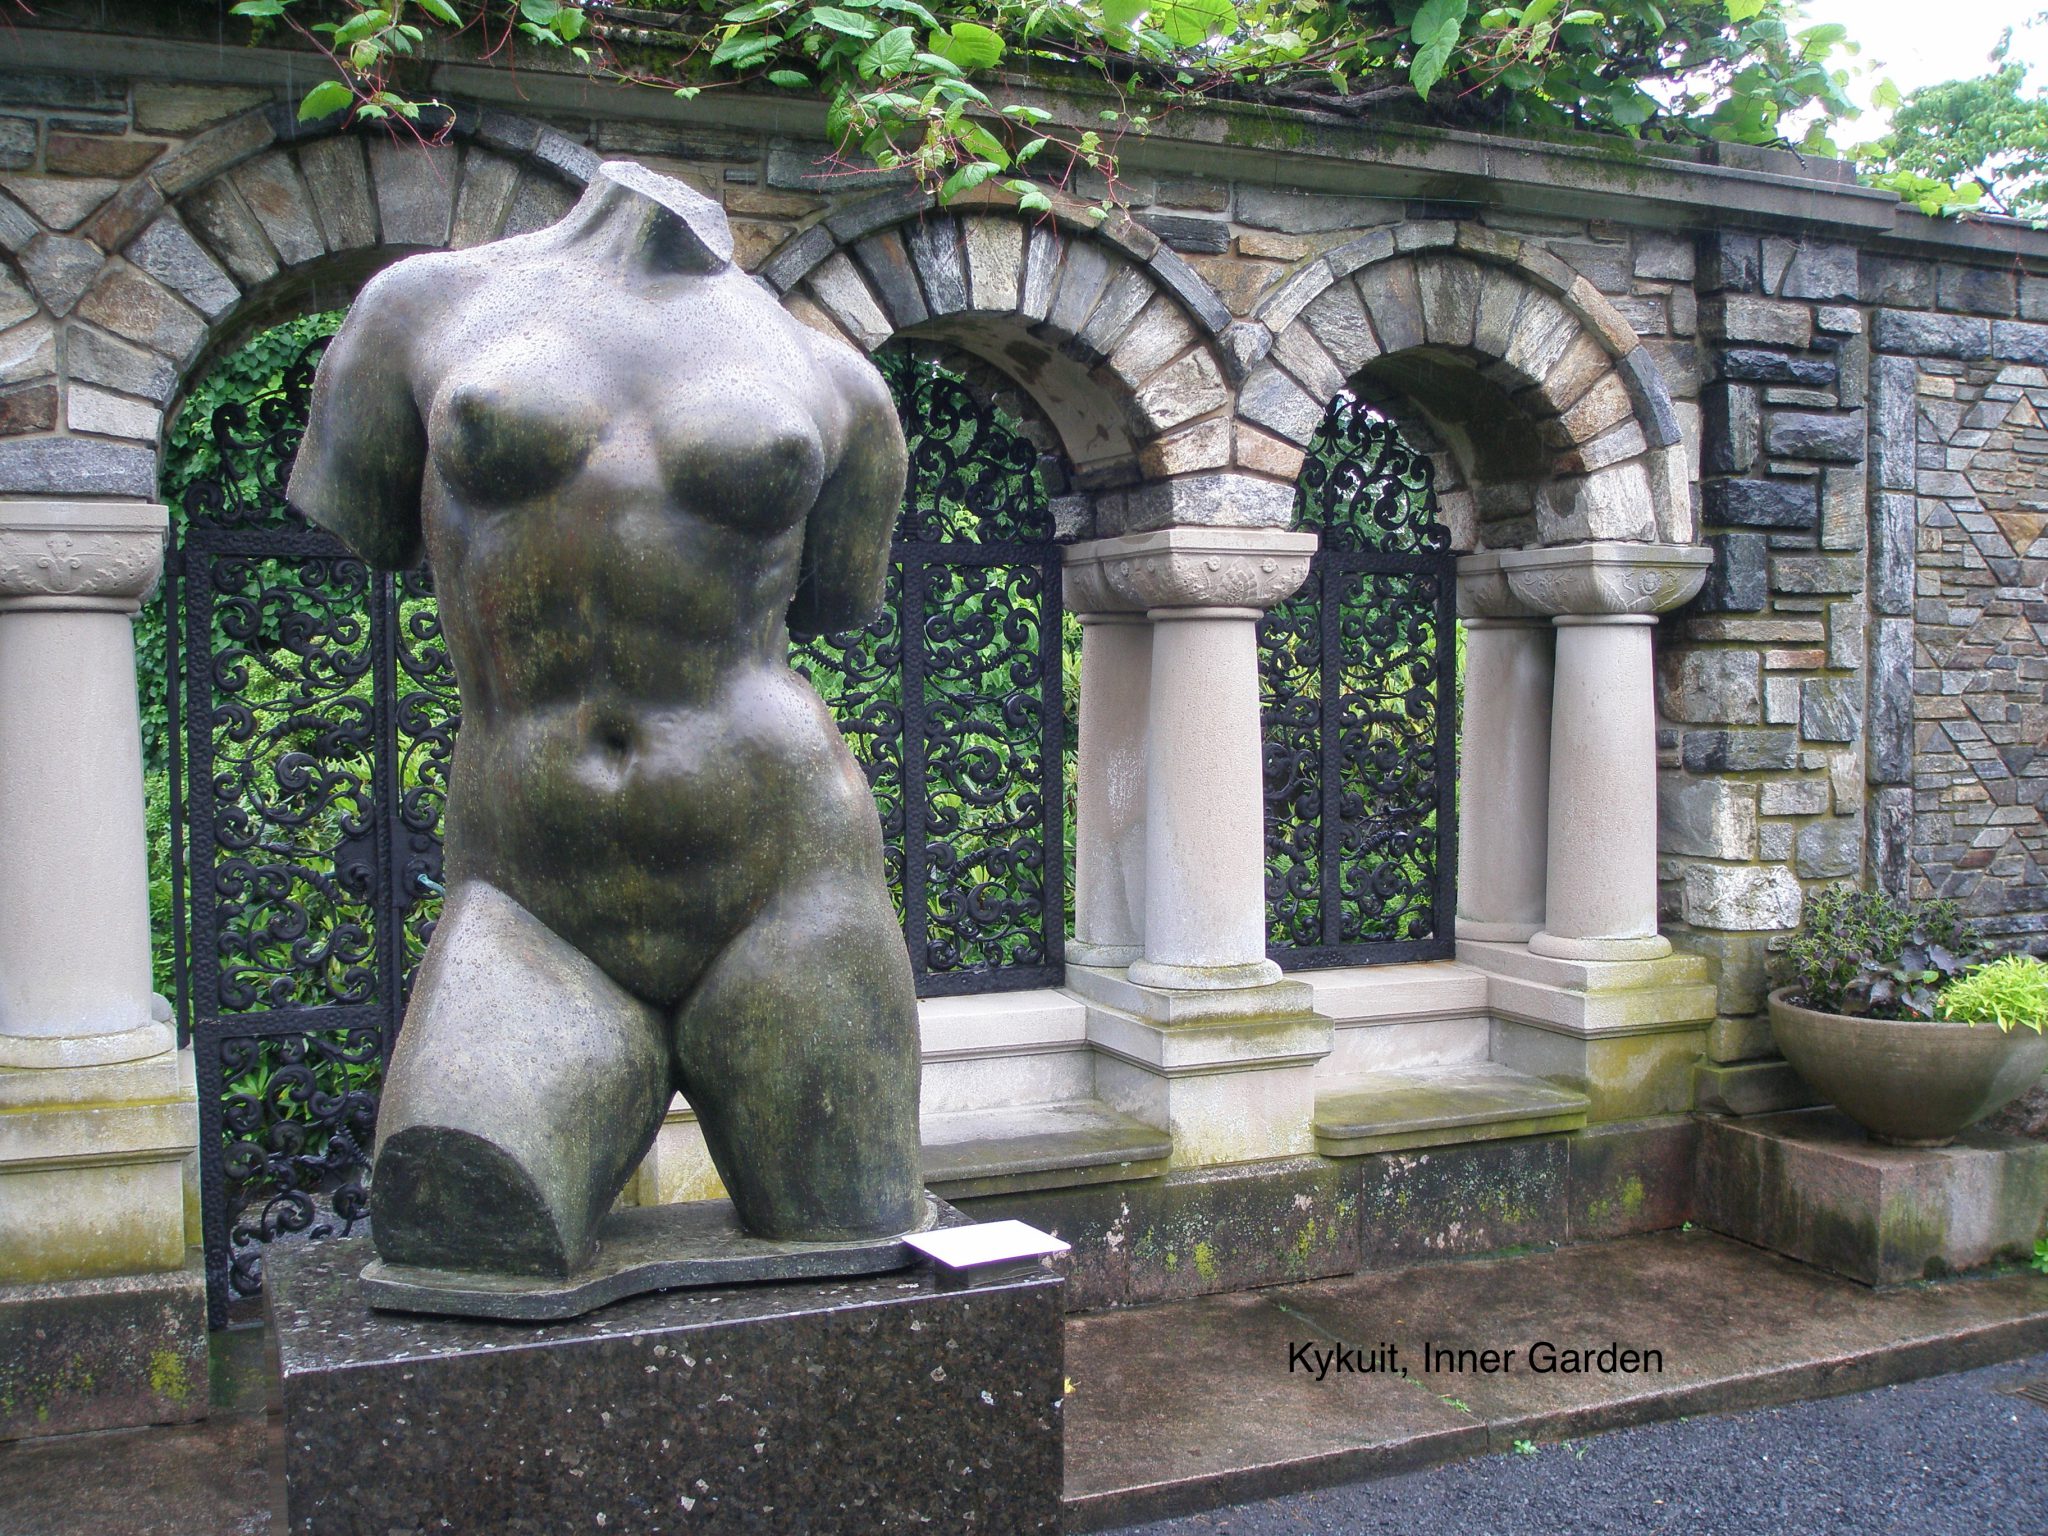 A bronze, by the wall that separates the Inner Garden from the Brook Garden